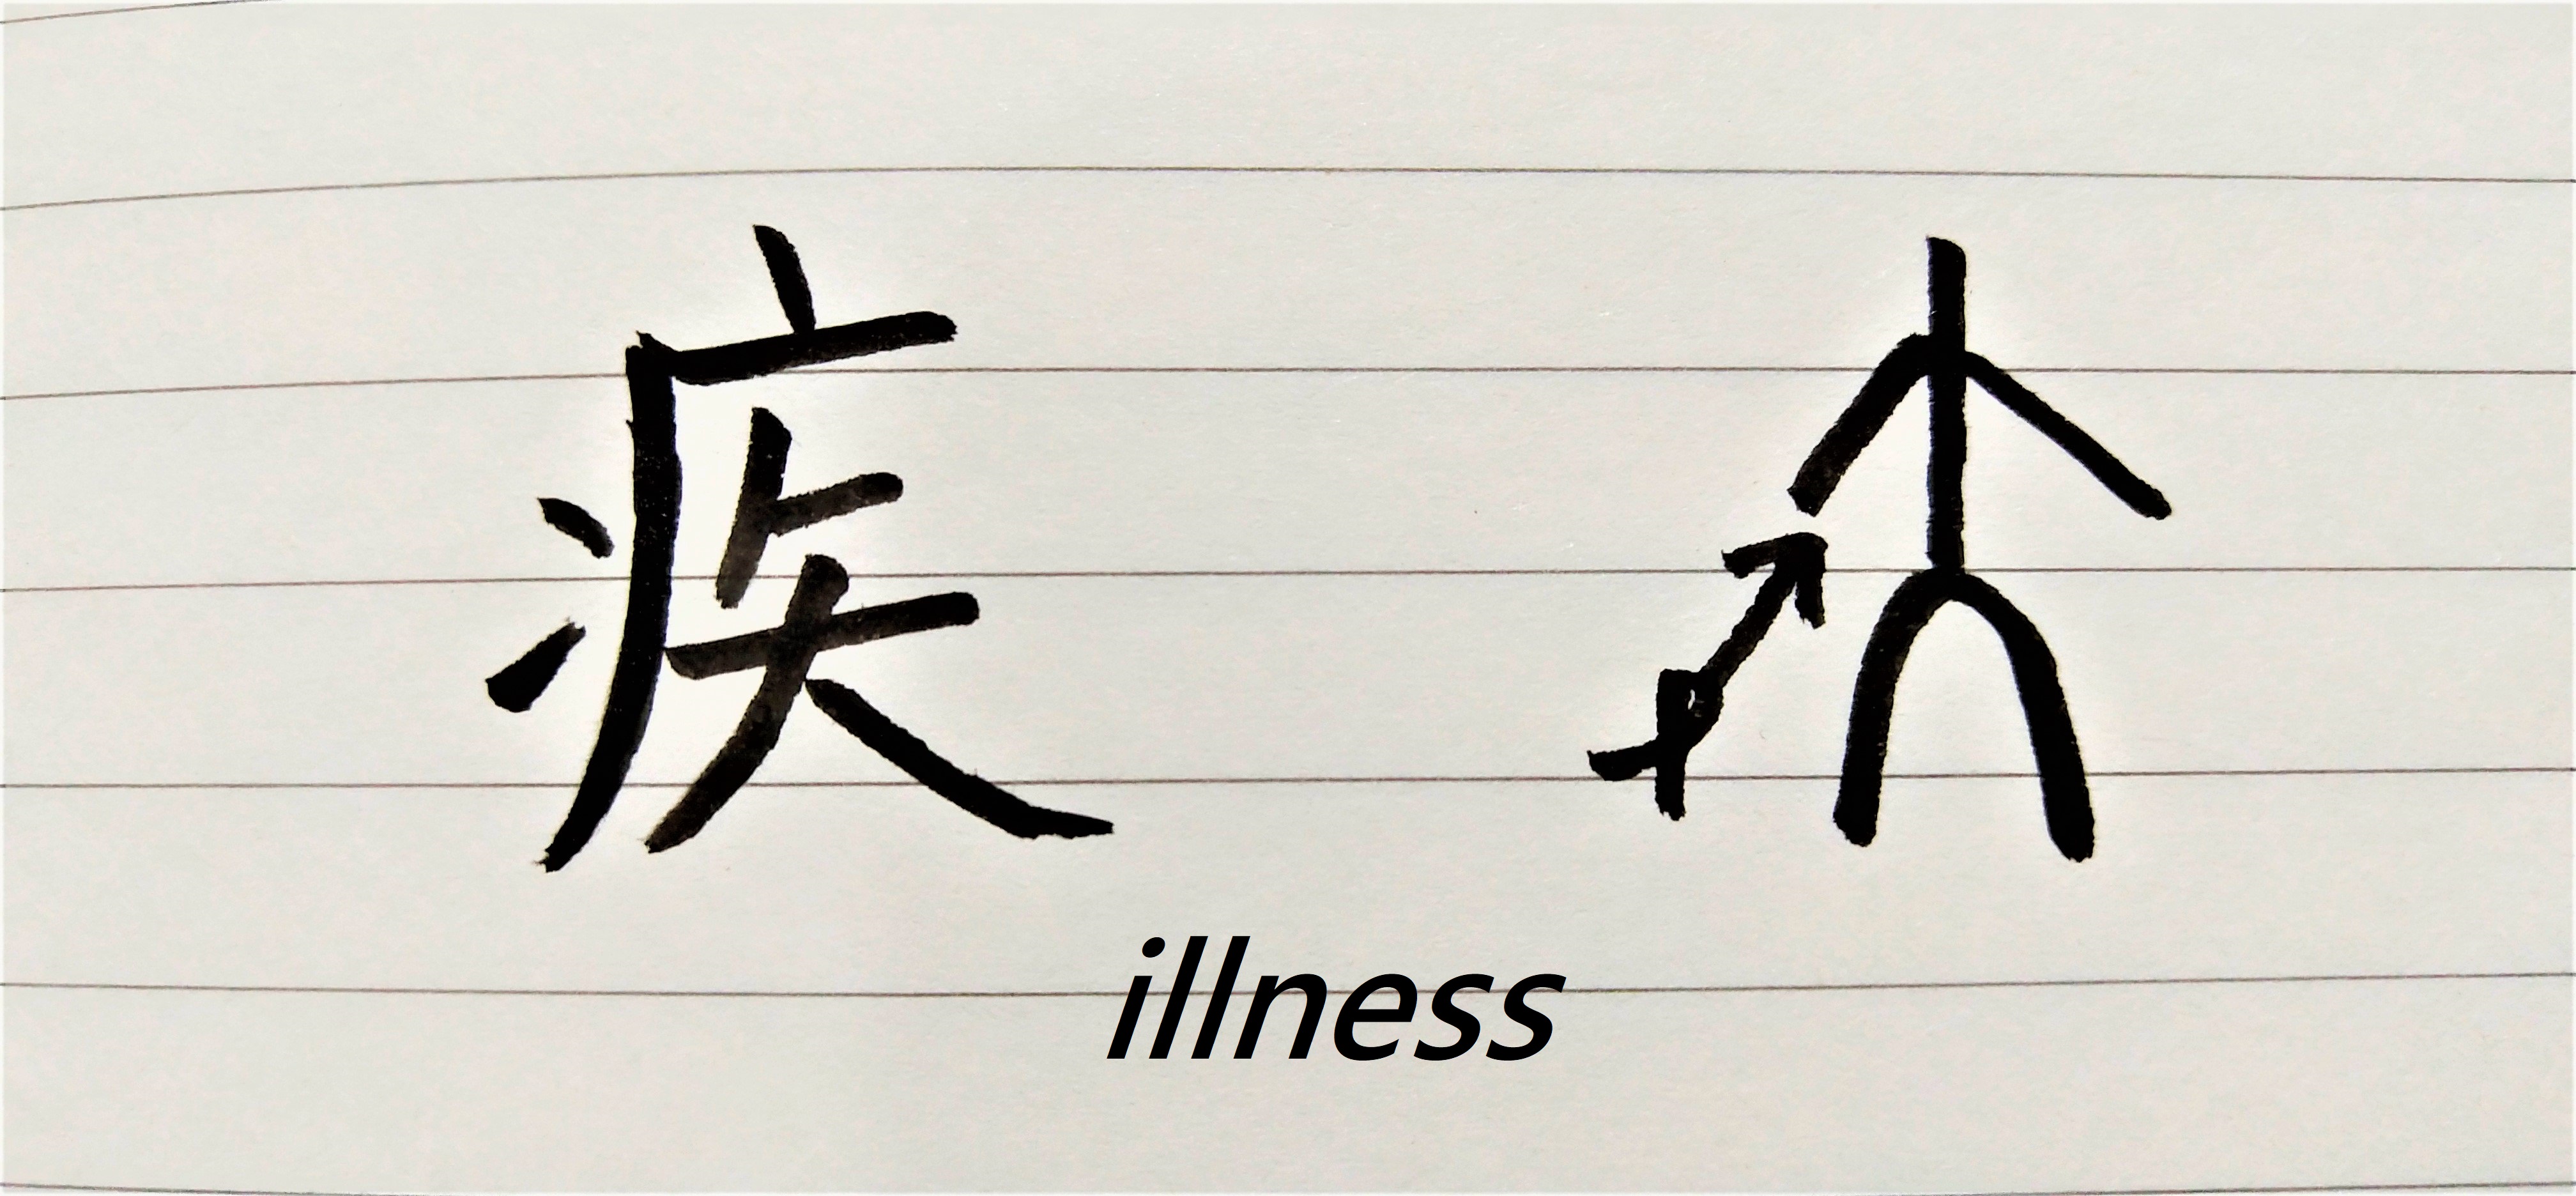 The left is the Chinese character for illness today. The right is the Oracle-bone inscription for the character in the past.